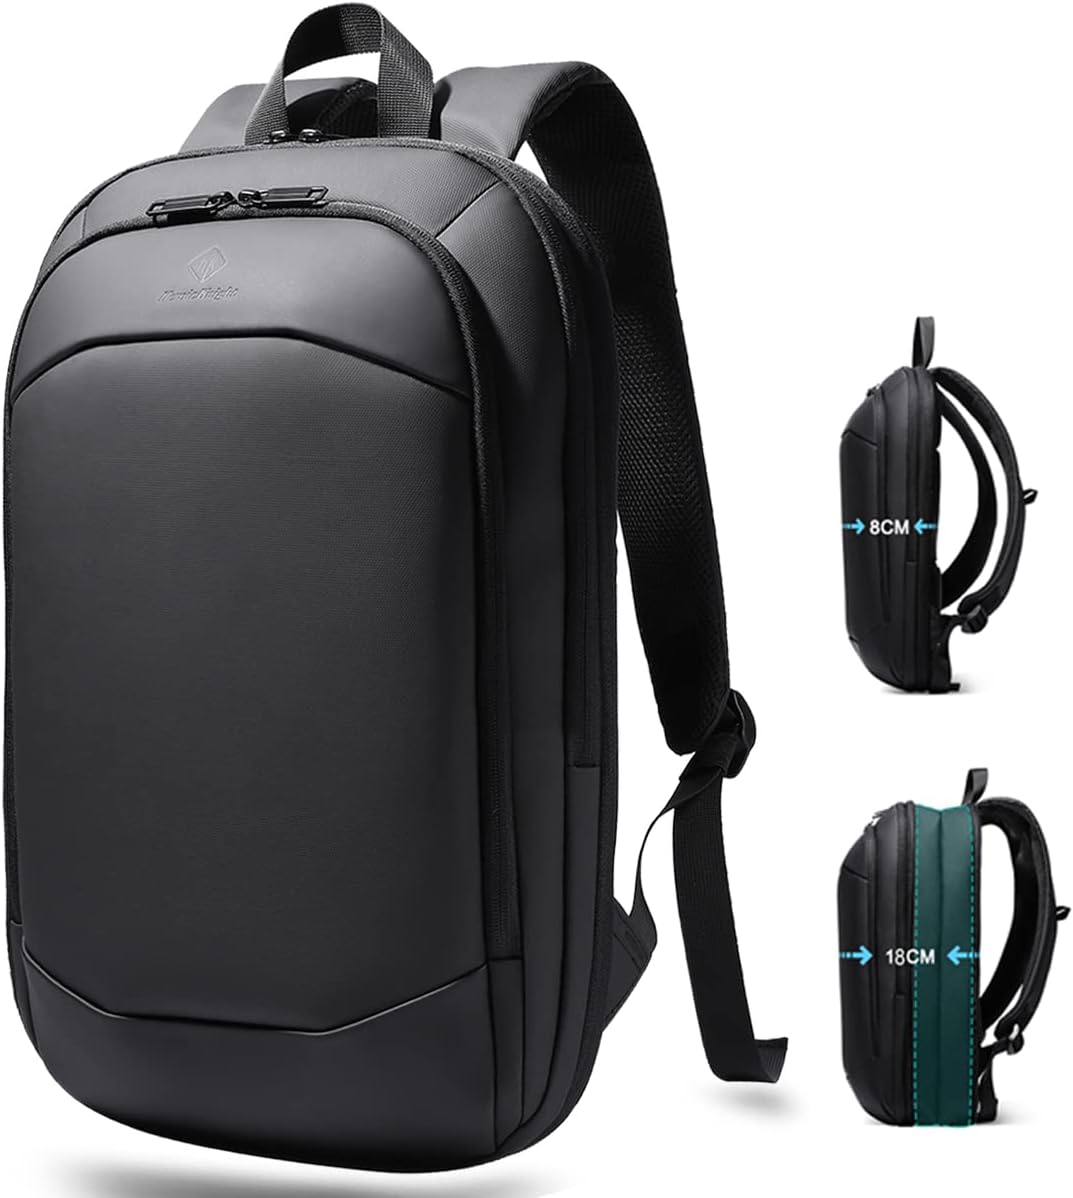 Business Backpack for Men Waterproof Anti Theft Travel [...]